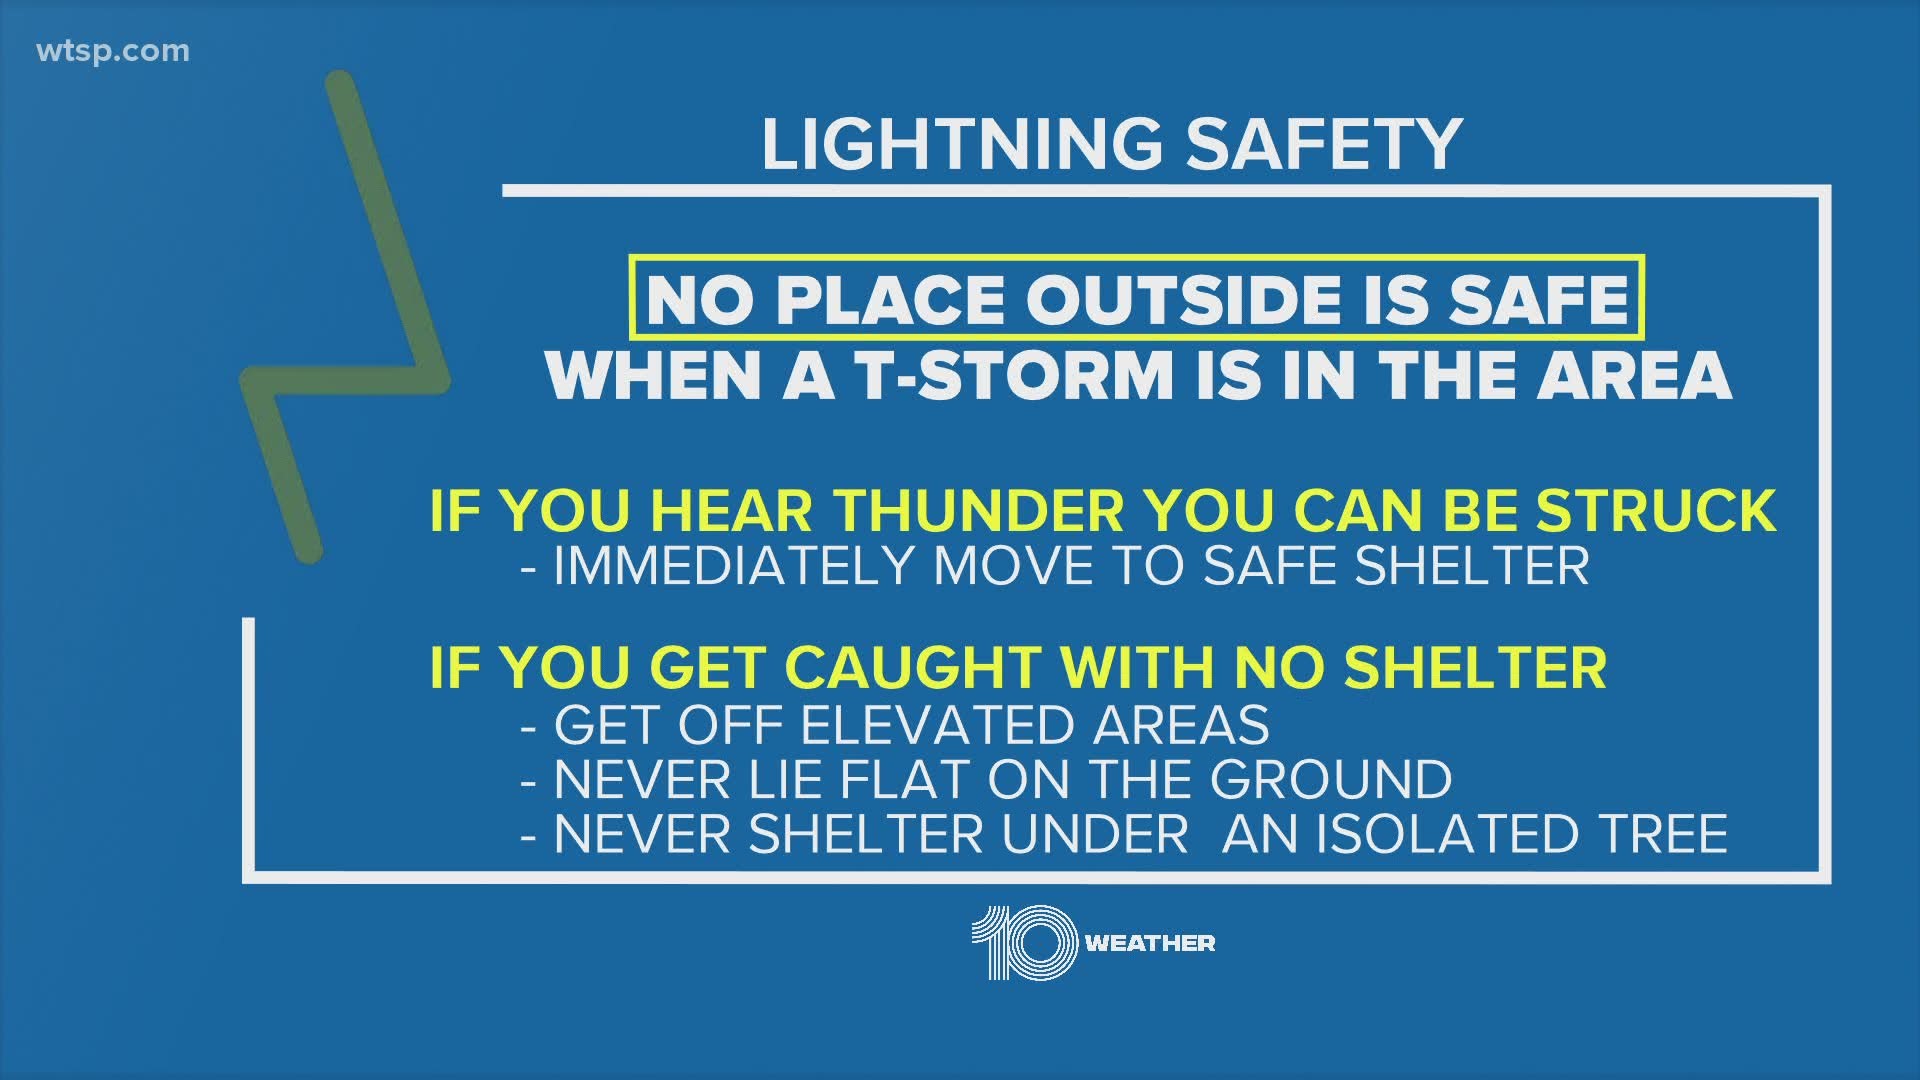 No place outside is safe from lightning.